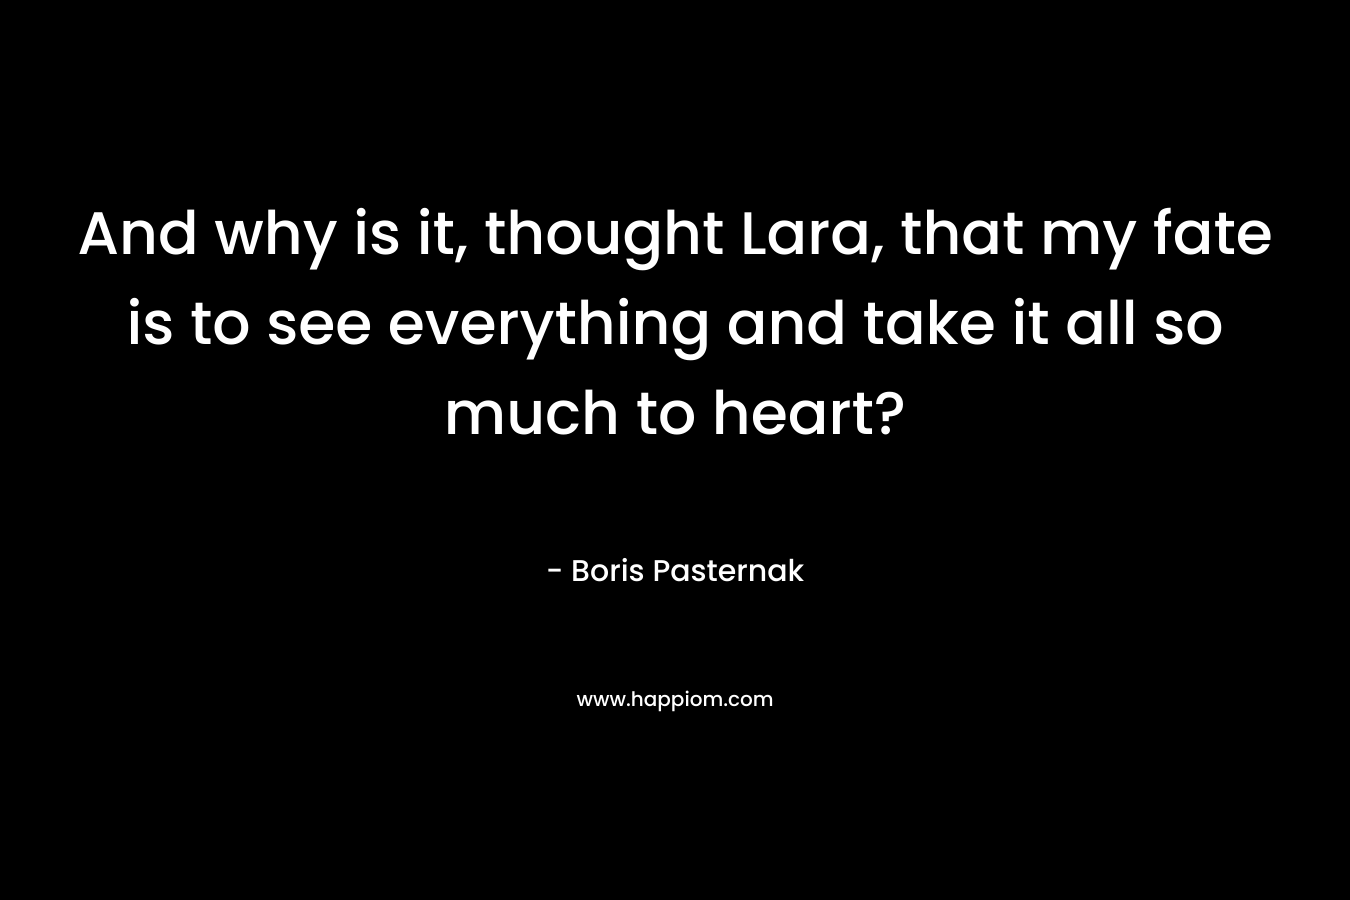 And why is it, thought Lara, that my fate is to see everything and take it all so much to heart?